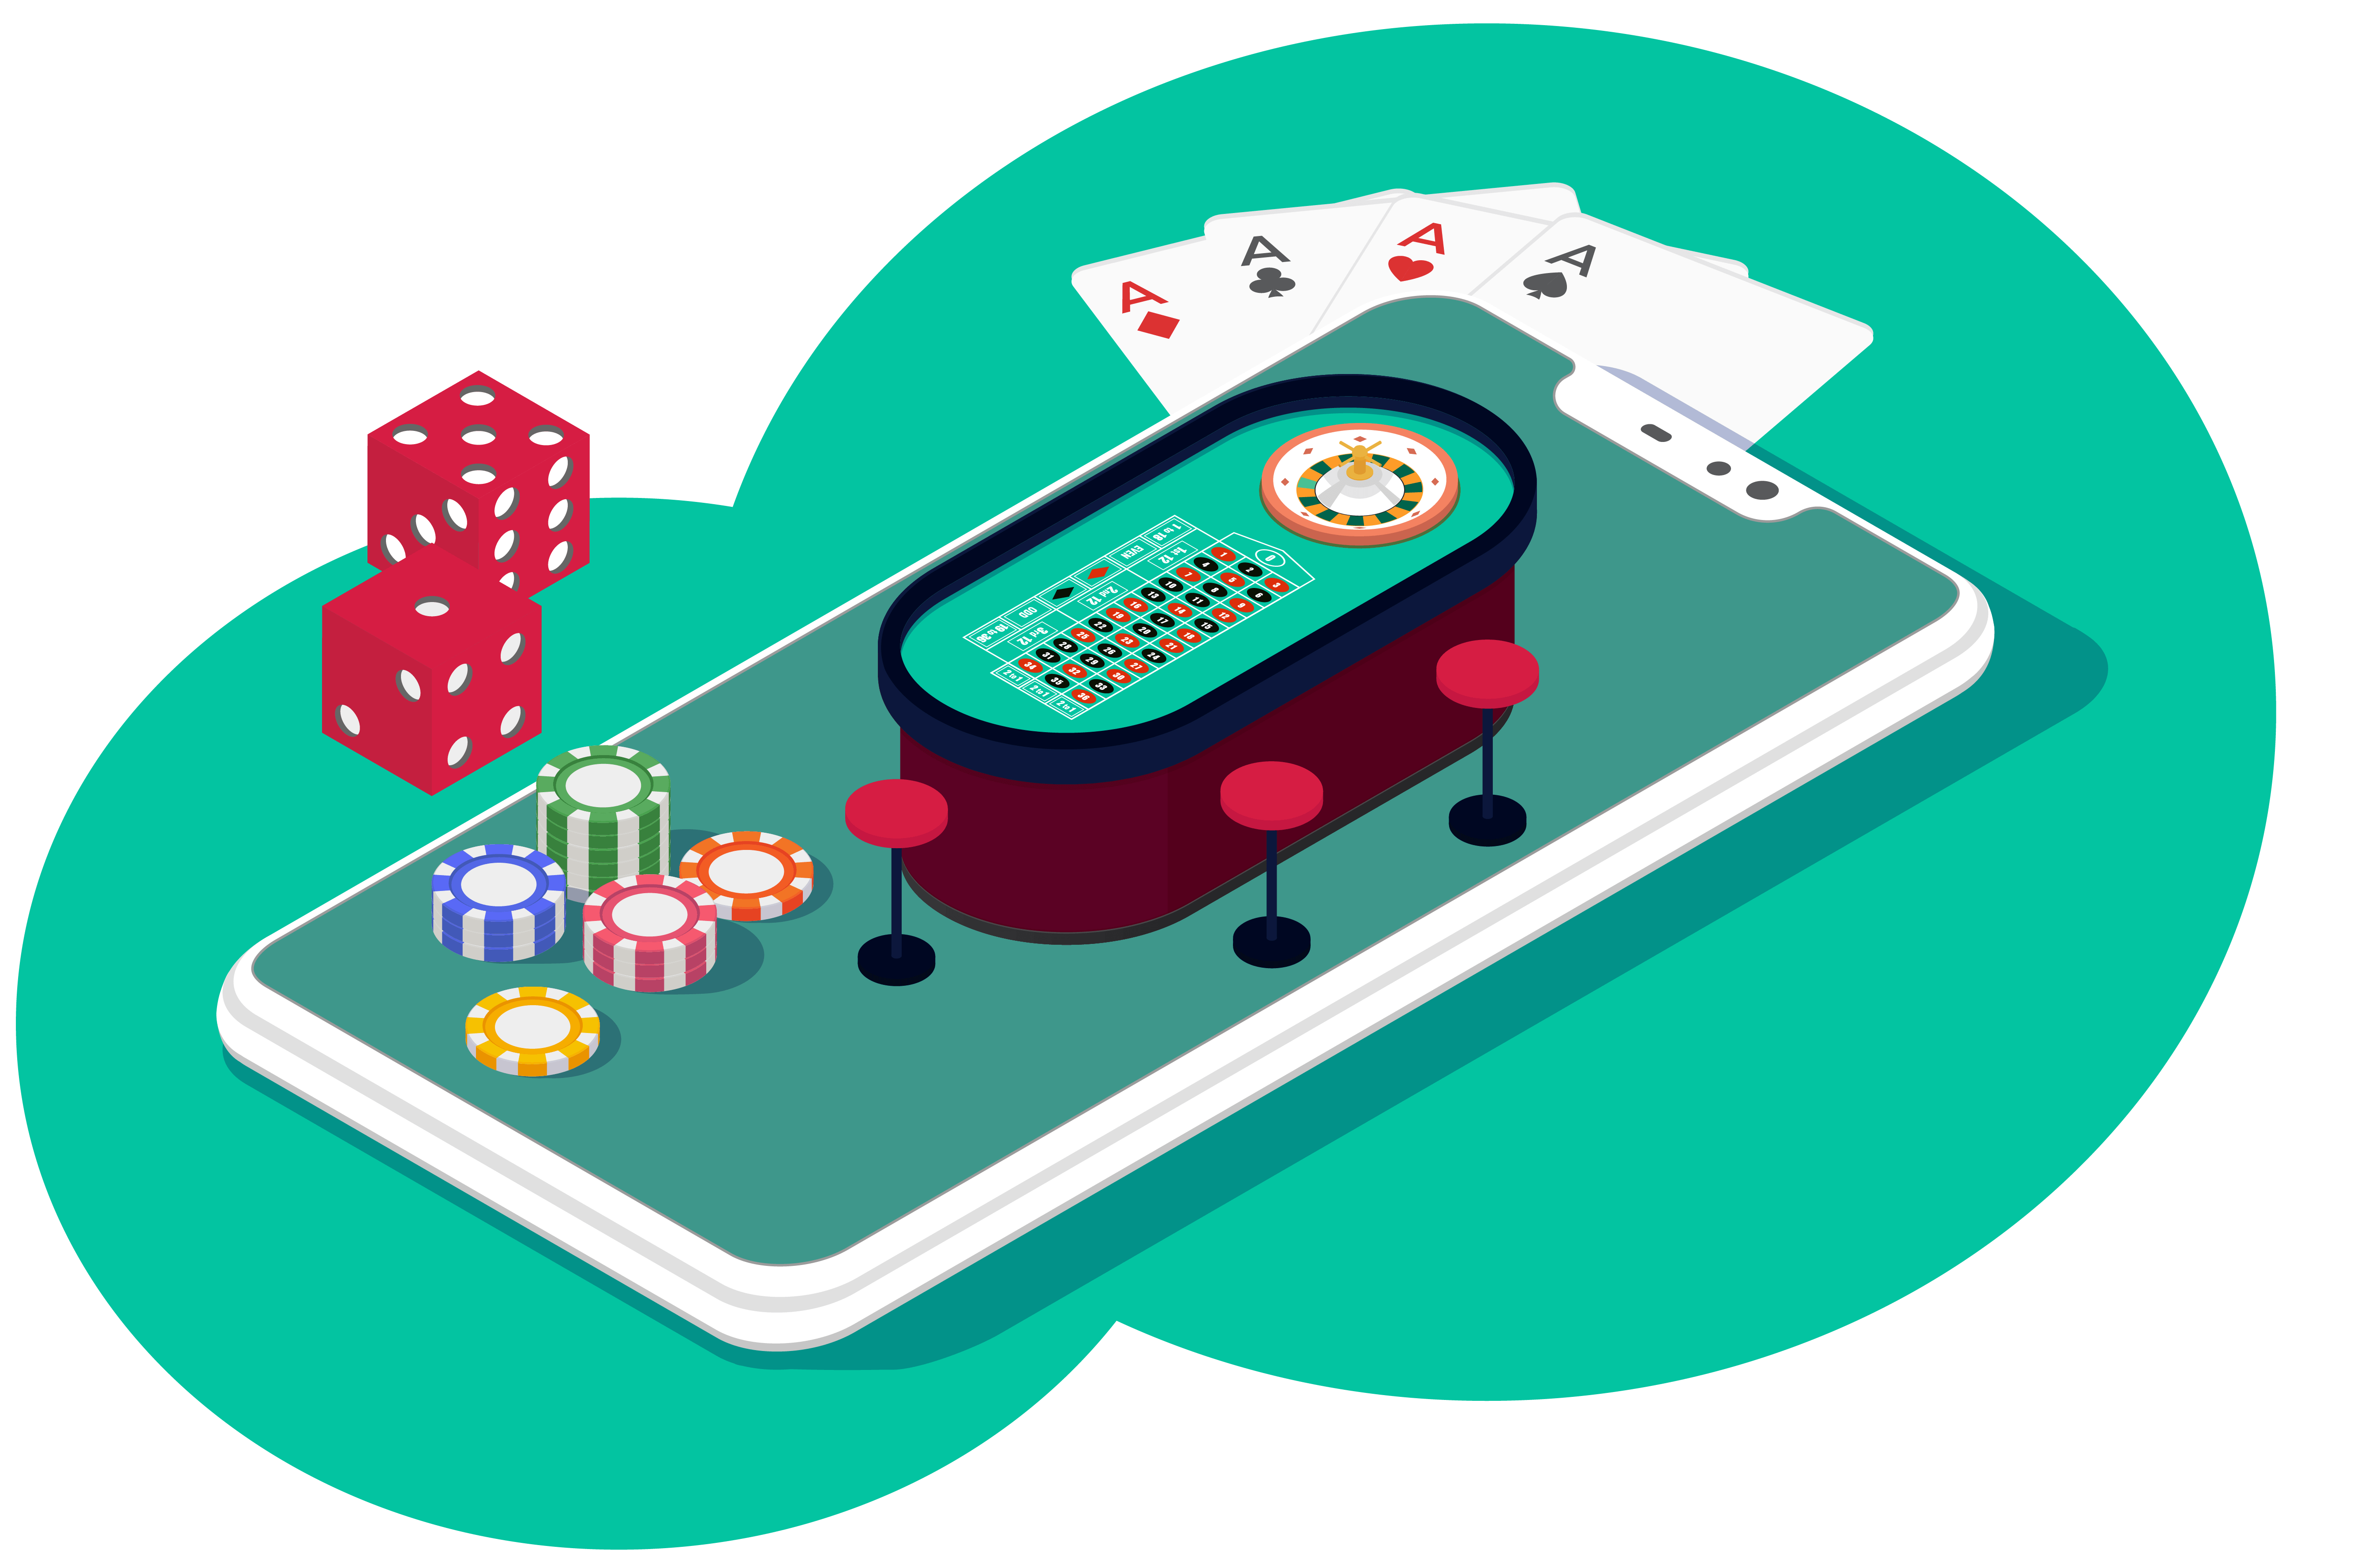 Pay By Mobile Phone Casinos